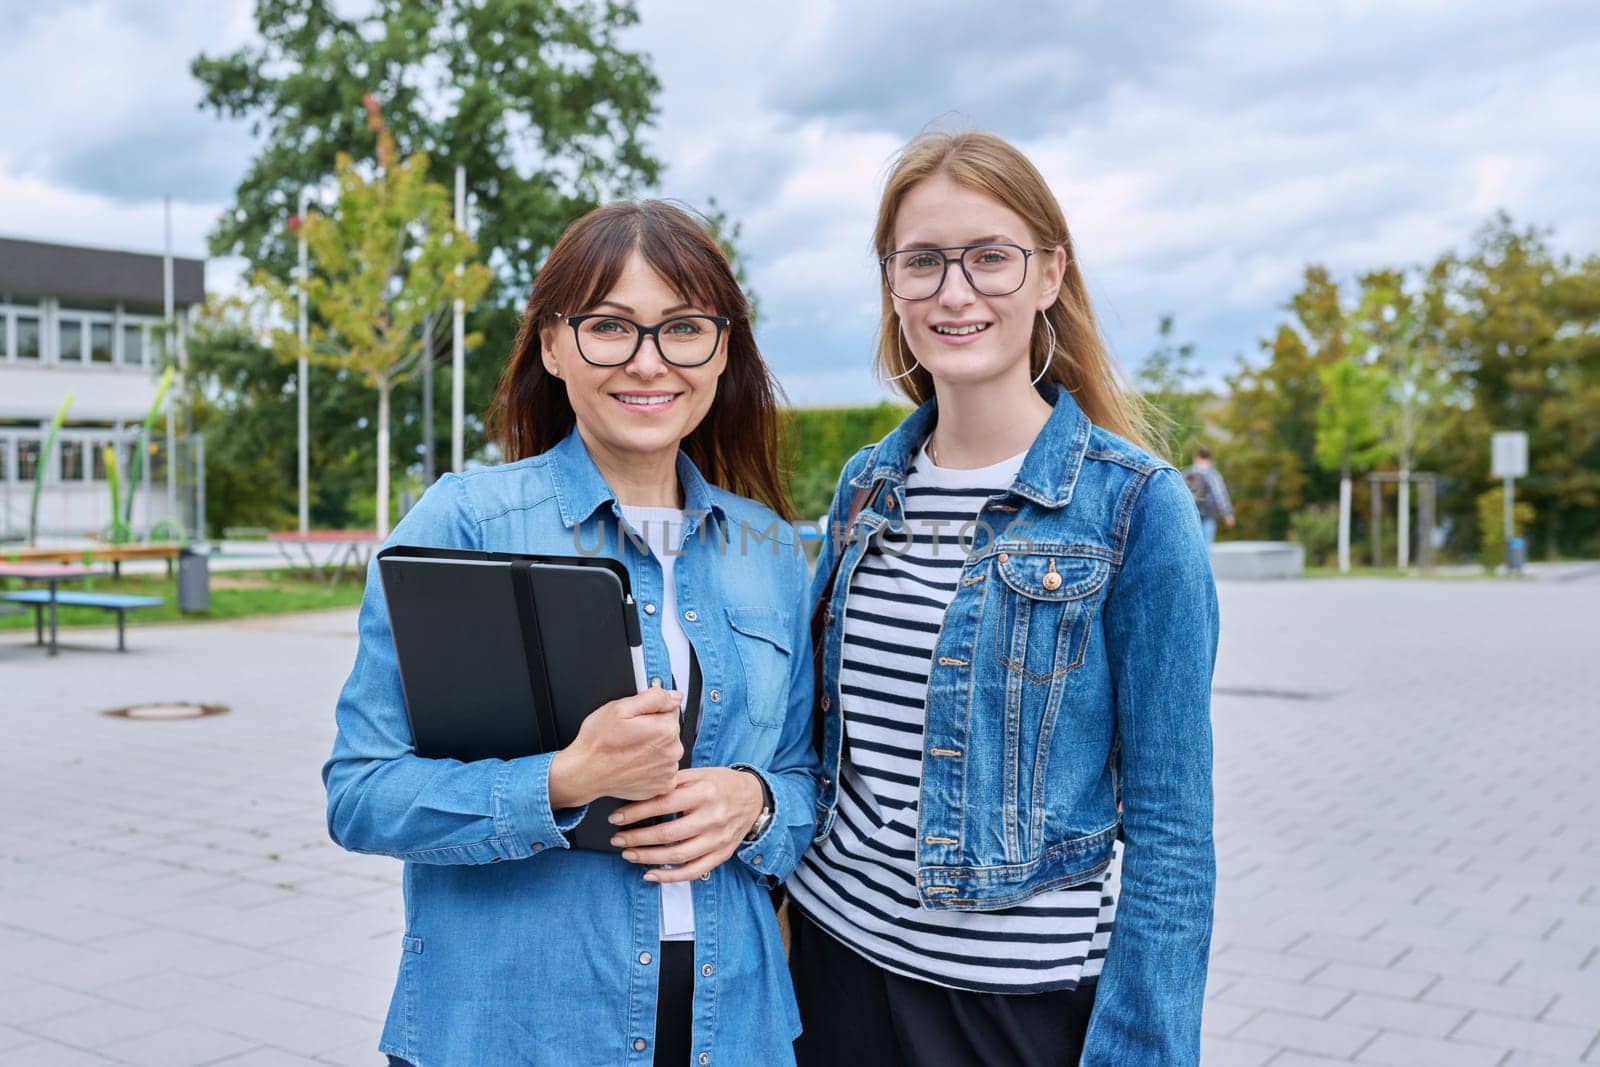 Teacher and teenage schoolgirl looking at camera together outdoor, school building background. Meeting communication student girl with backpack and mentor counselor. Education, adolescence, learning concept